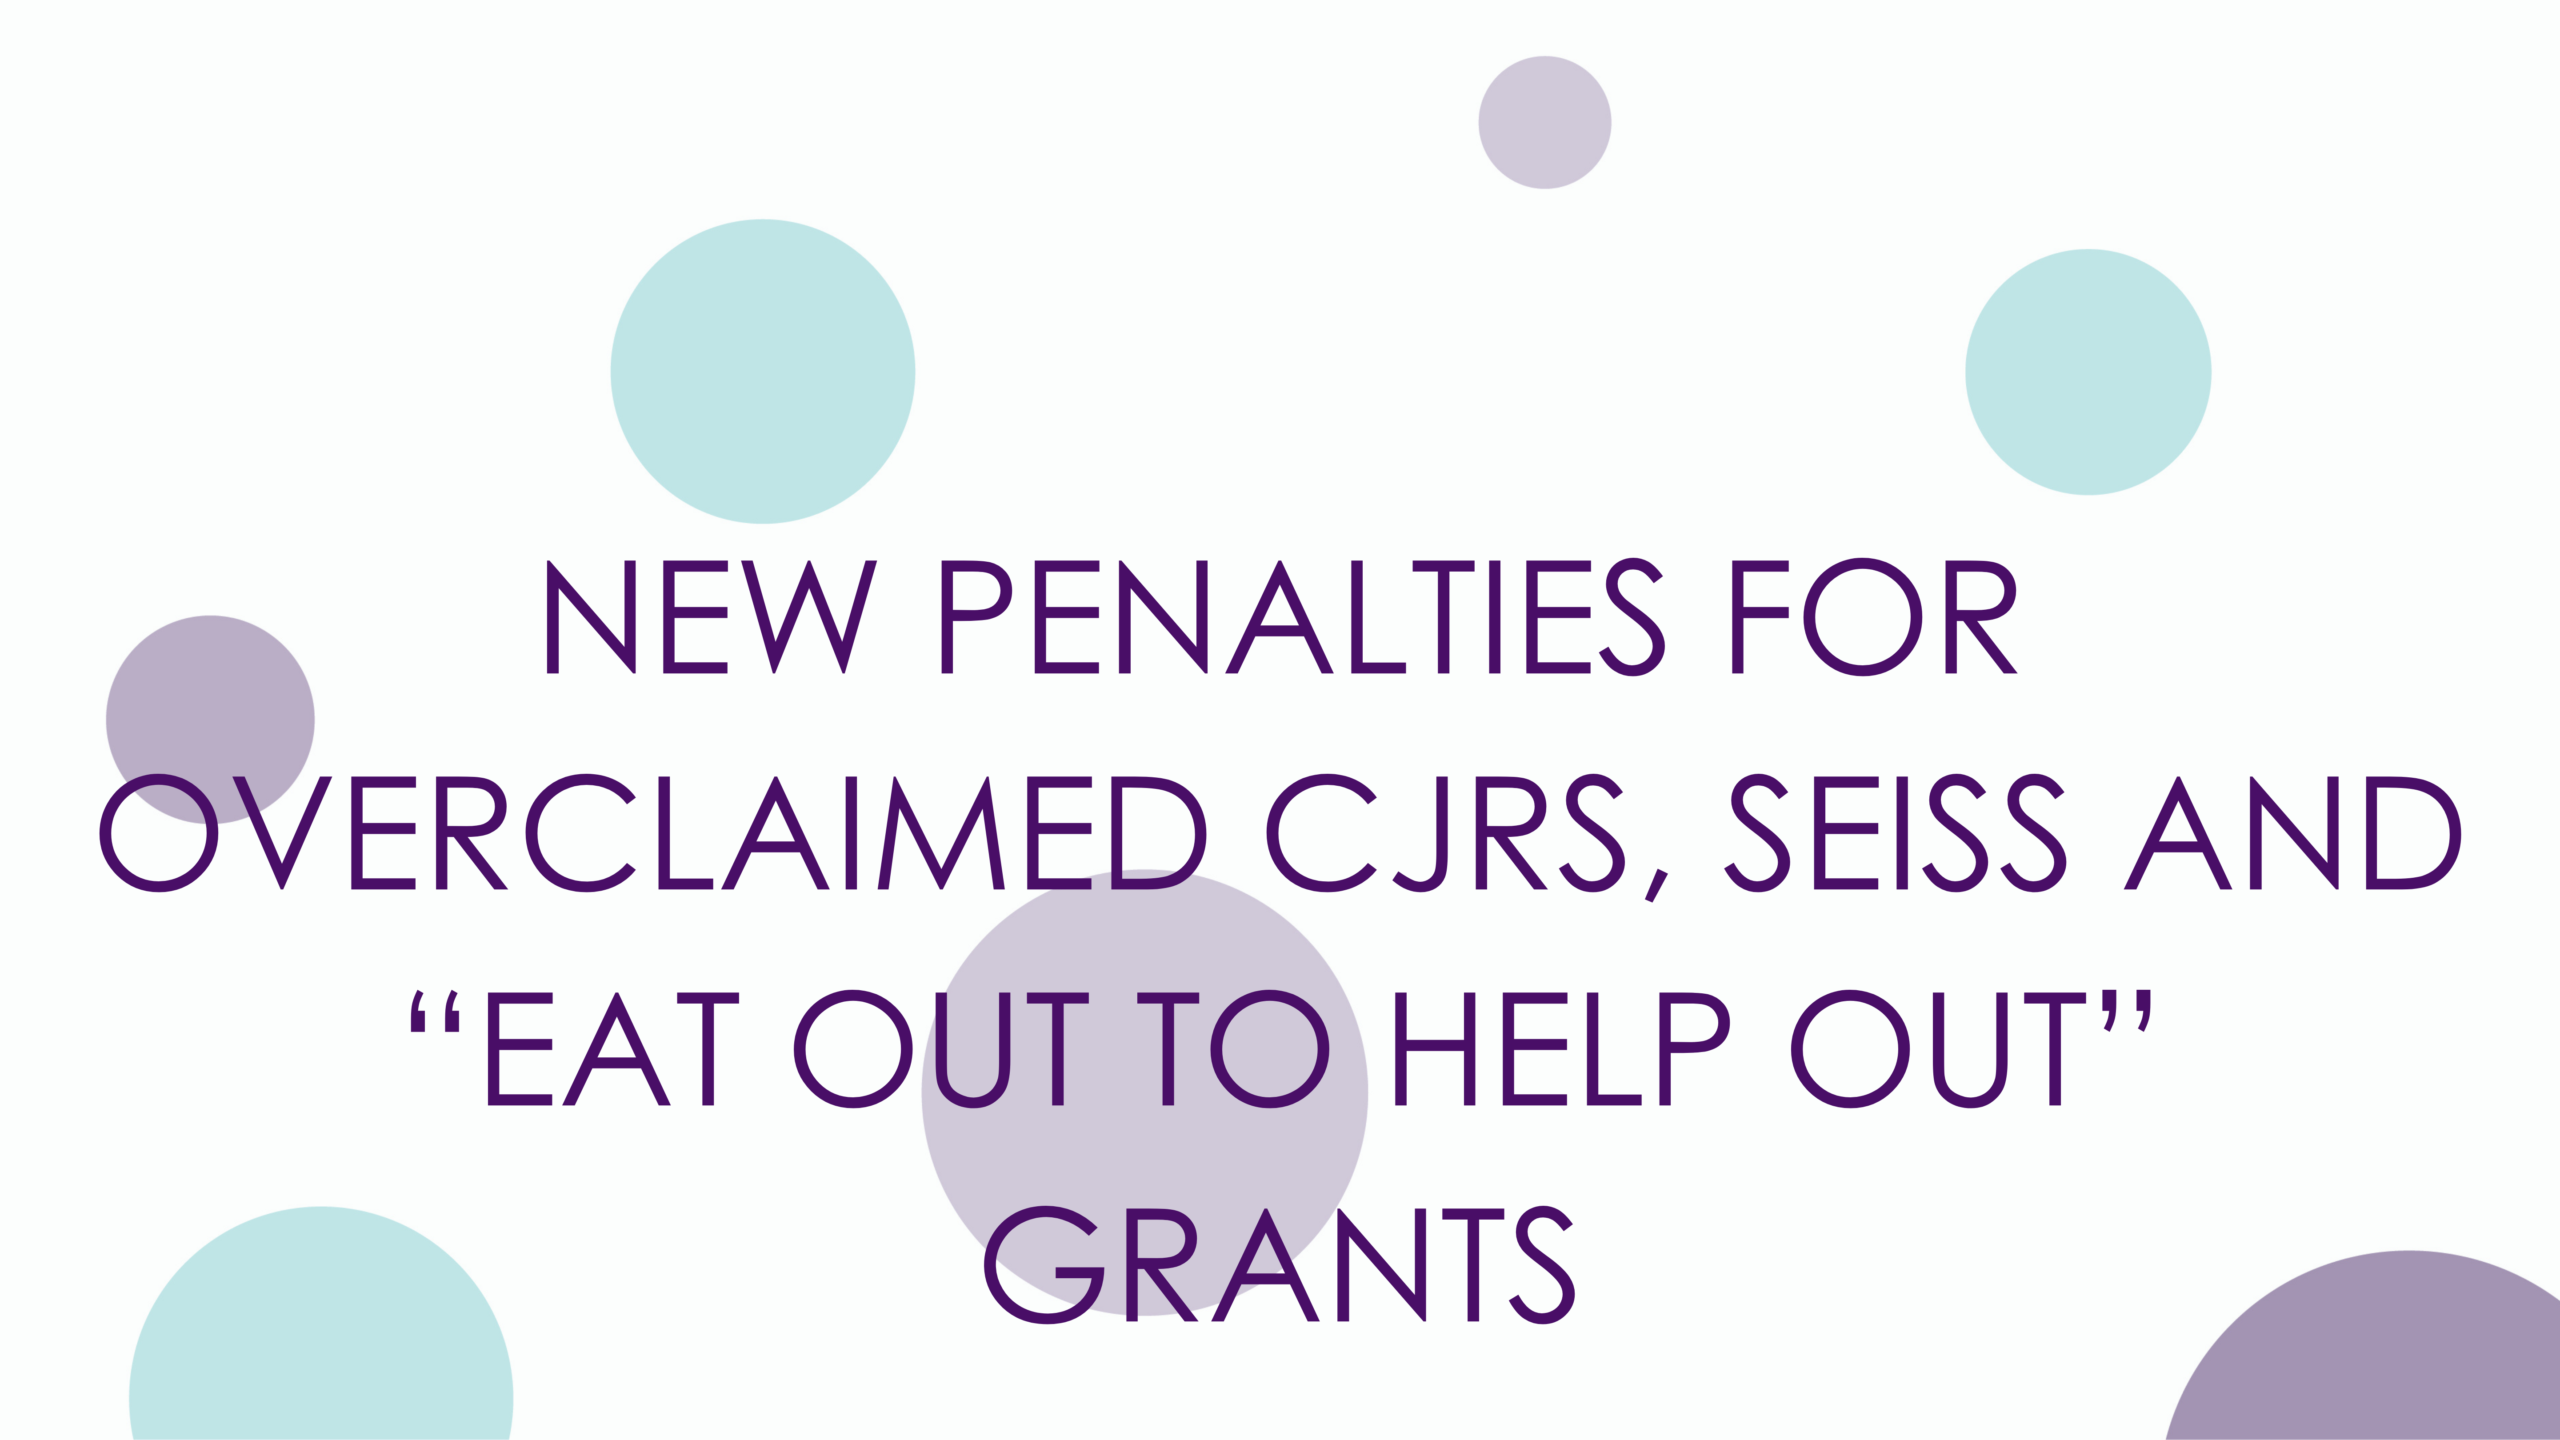 NEW PENALTIES FOR OVERCLAIMED CJRS, SEISS AND “EAT OUT TO HELP OUT” GRANTS